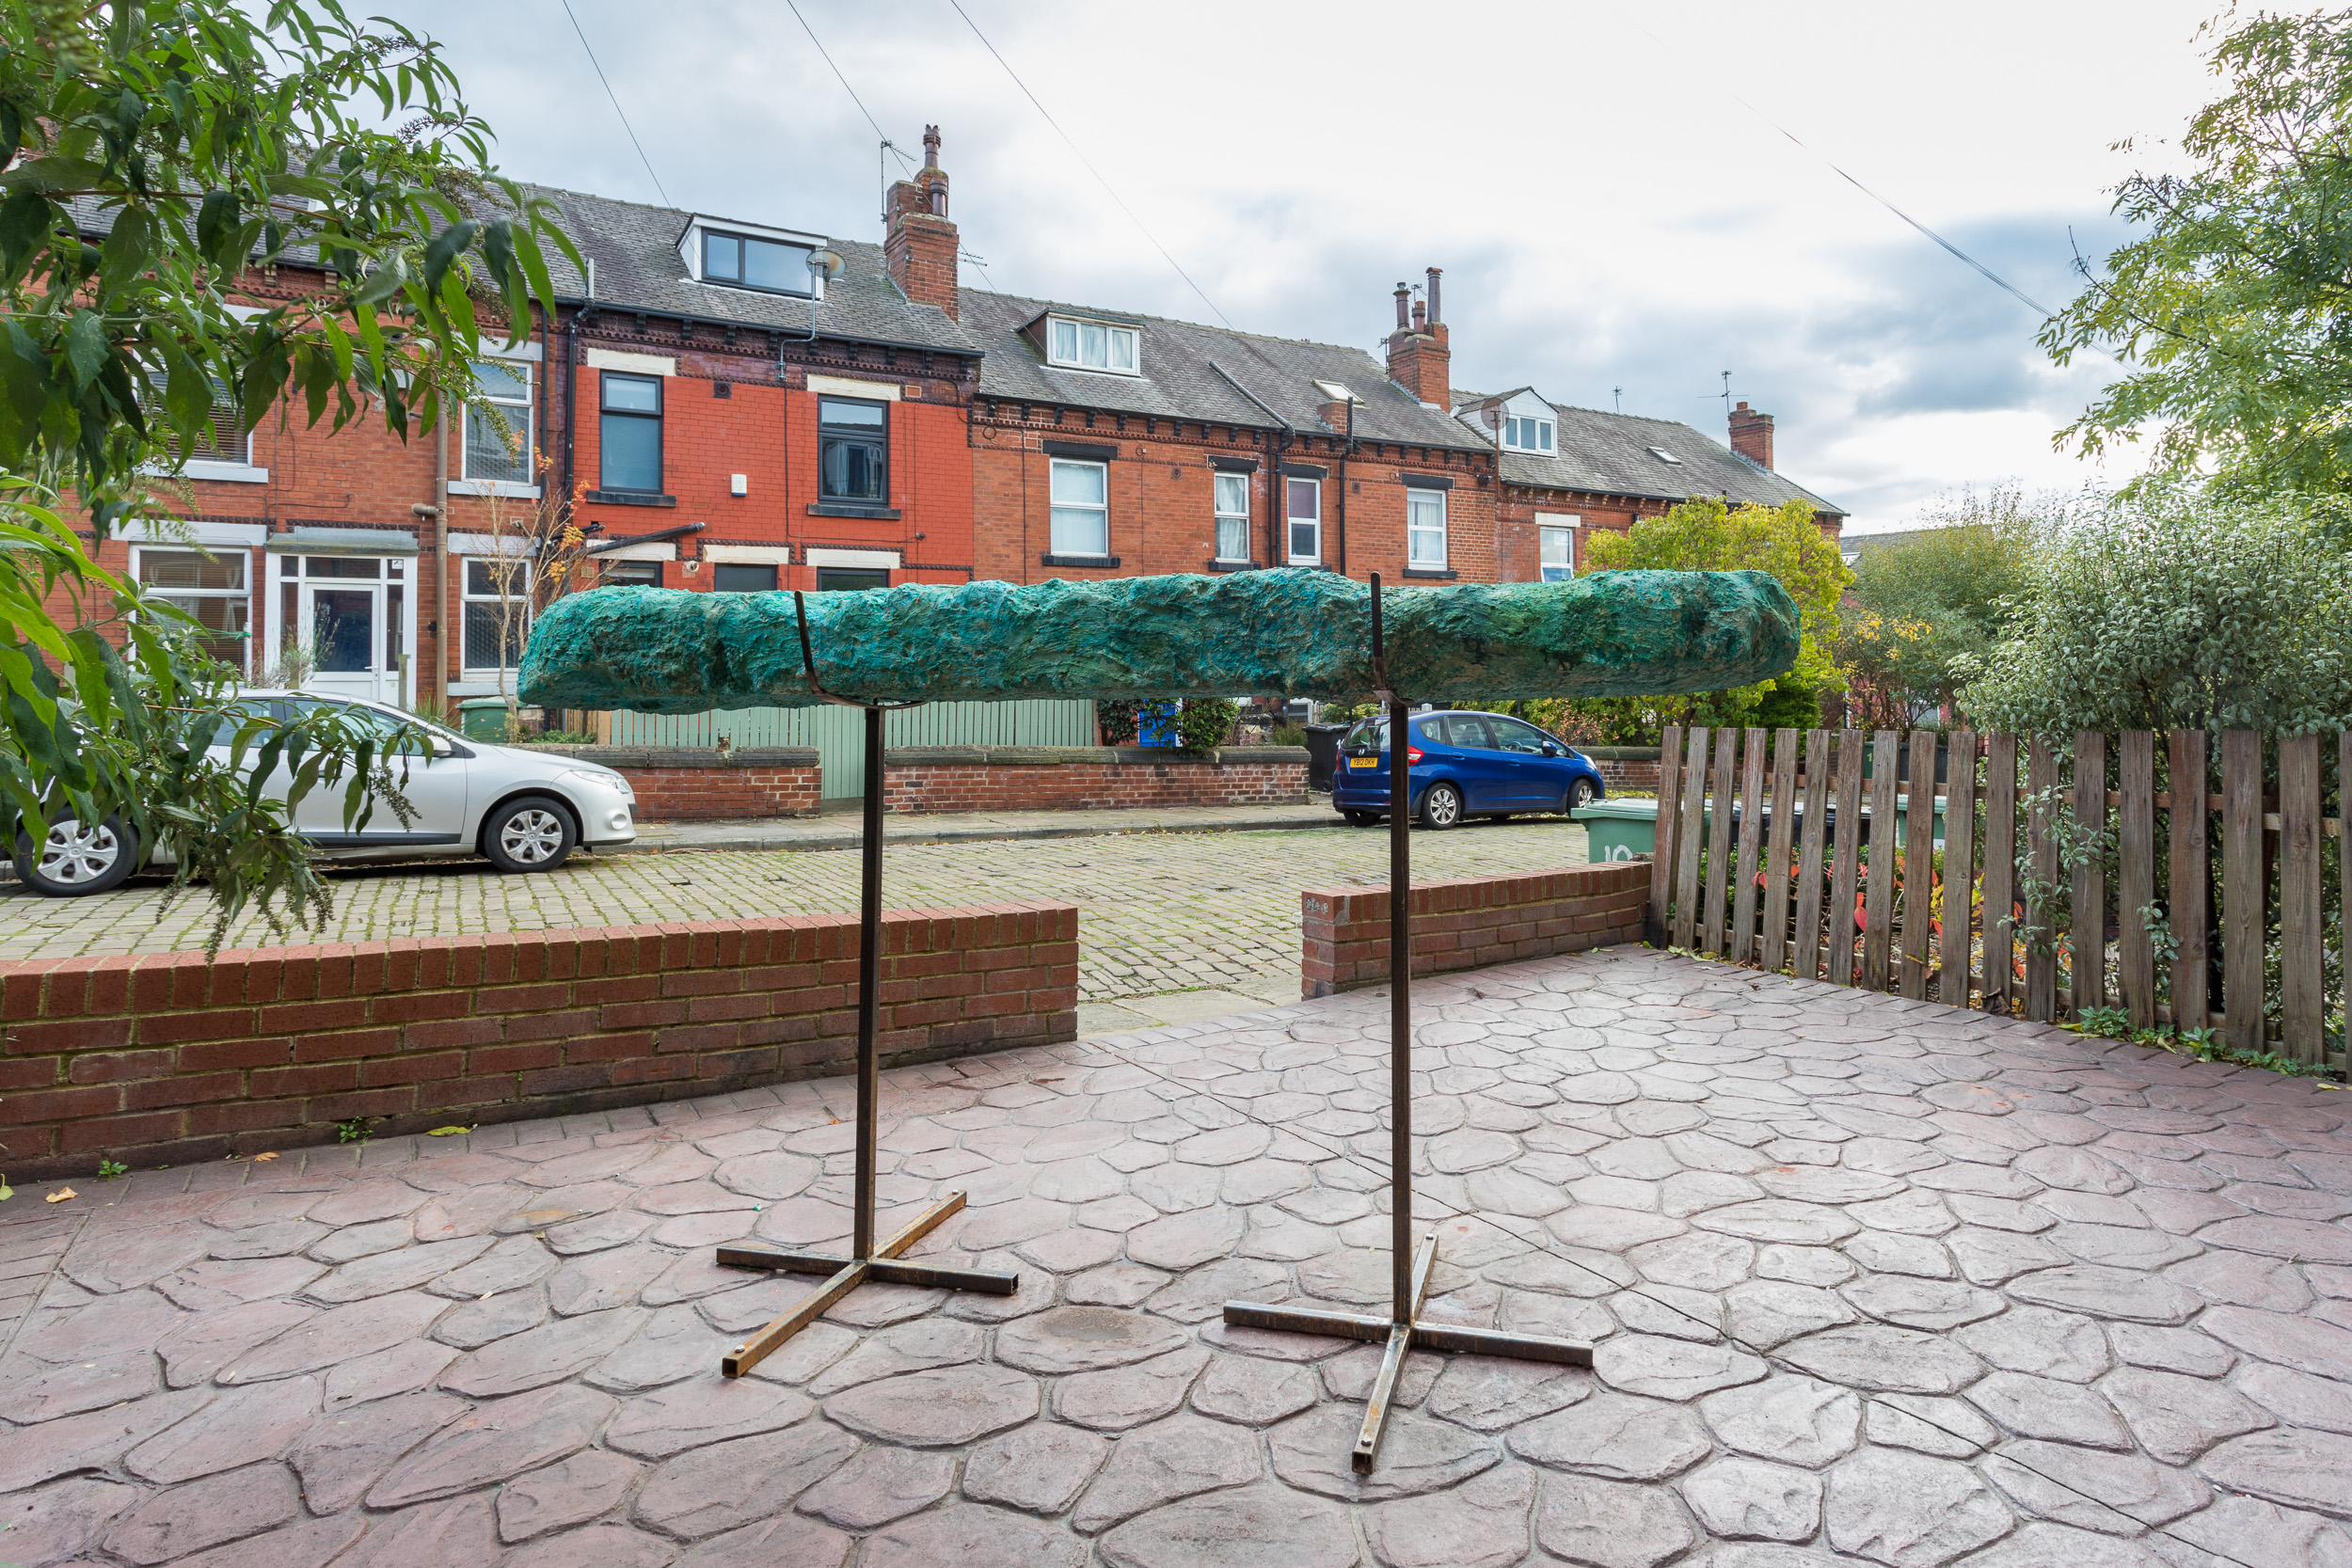 A beam like green sculpture is balanced on two metal supports in the paved back garden, with a view of a terraced back street.